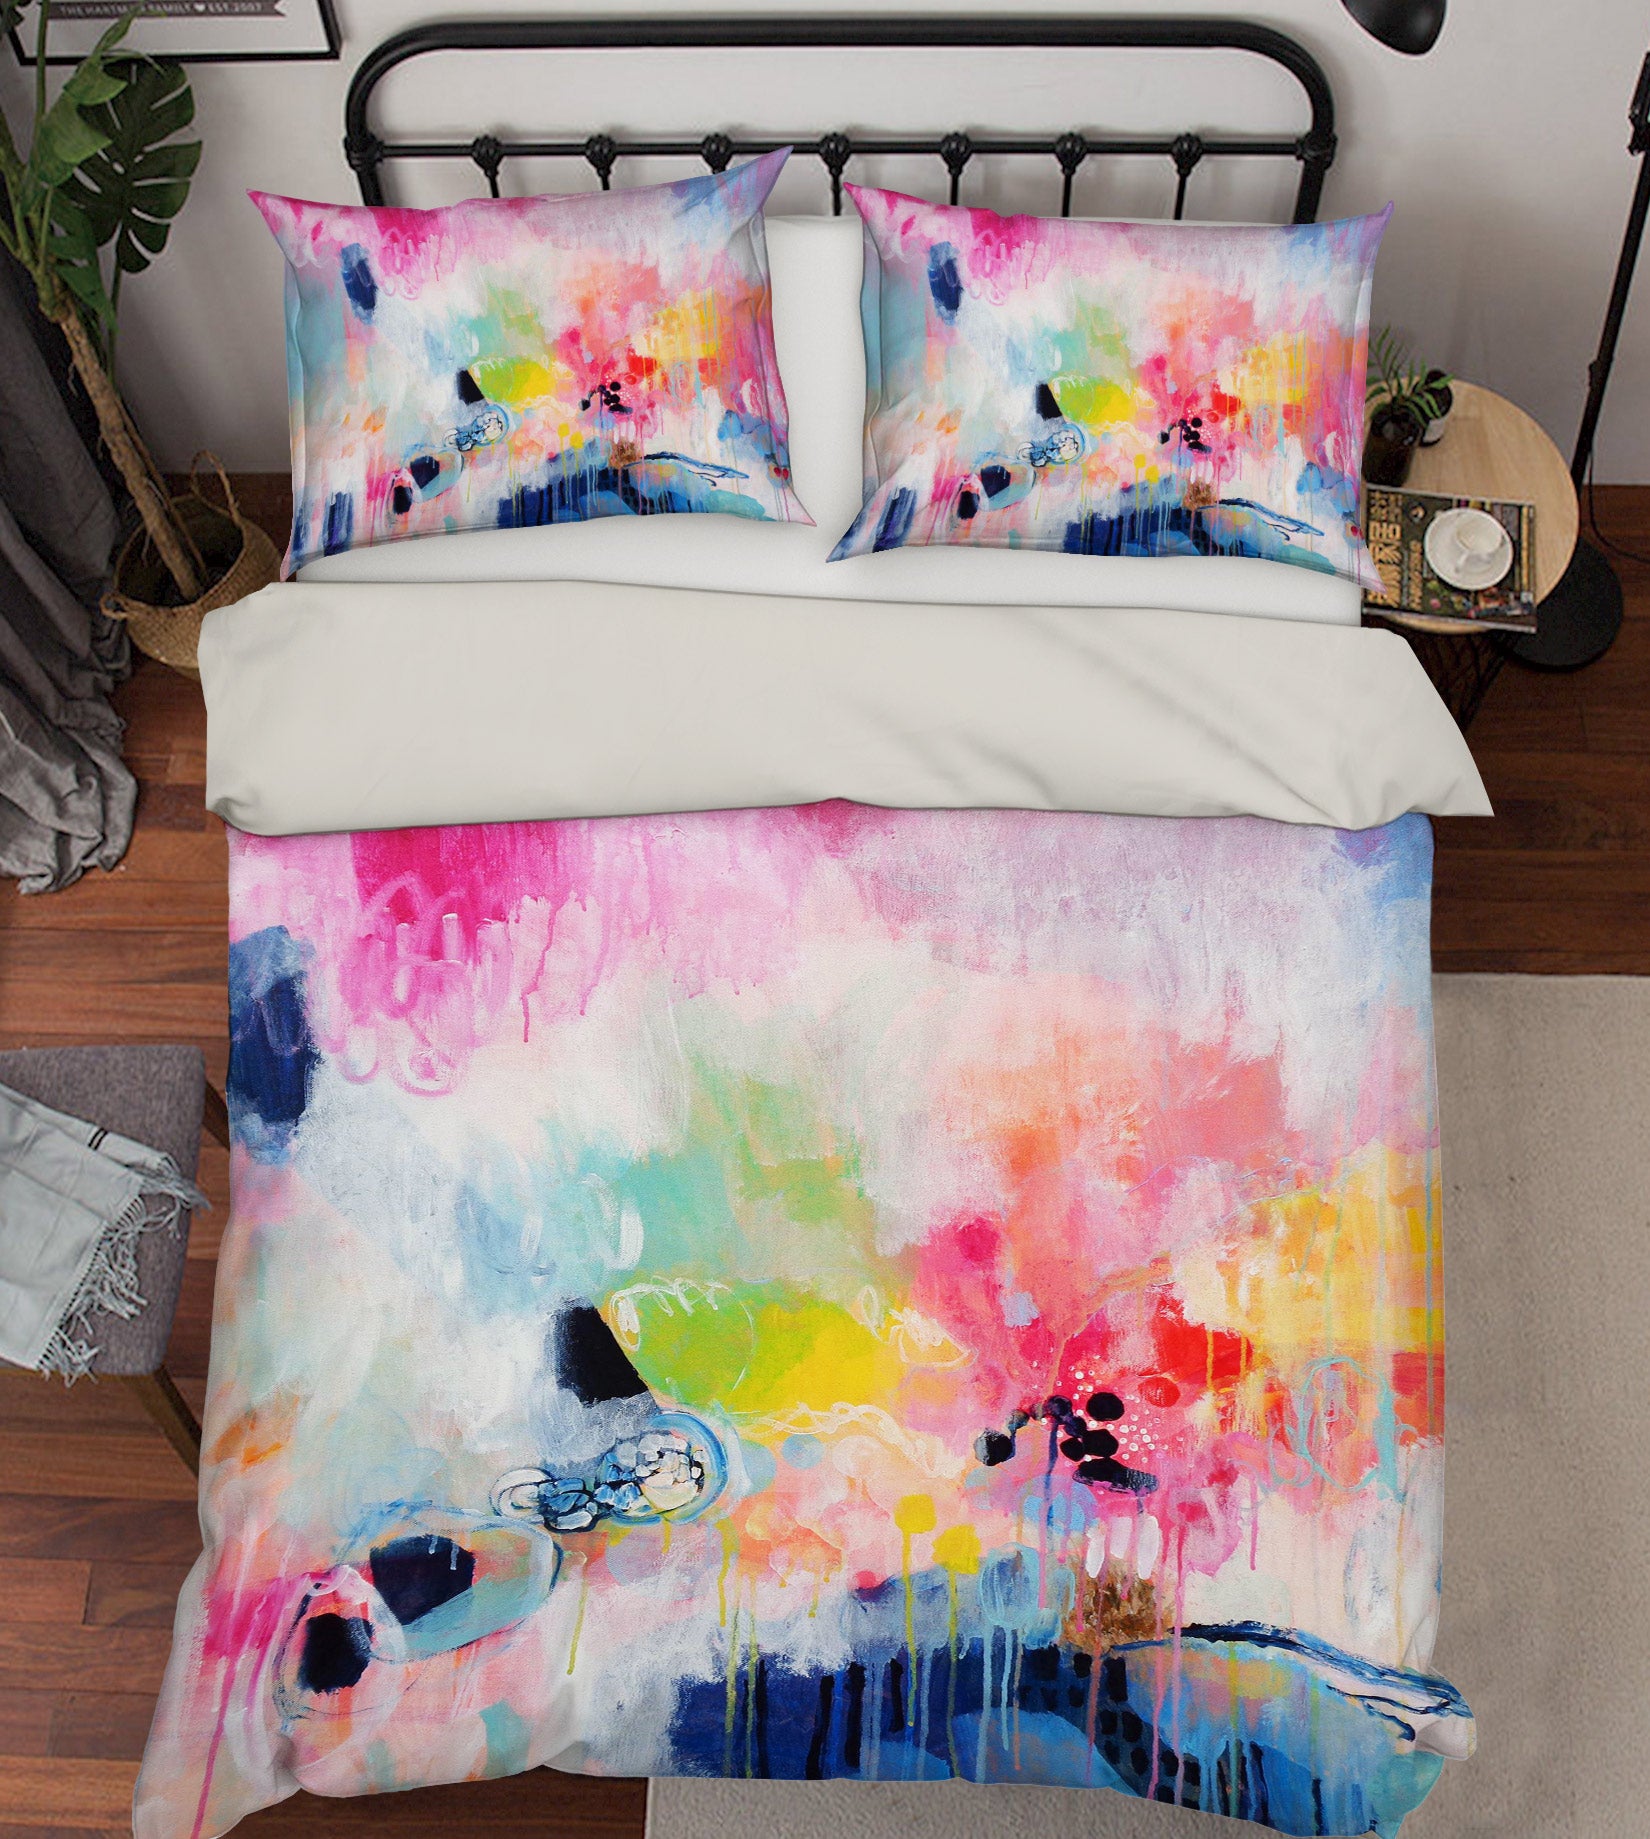 3D Color Painting 1202 Misako Chida Bedding Bed Pillowcases Quilt Cover Duvet Cover